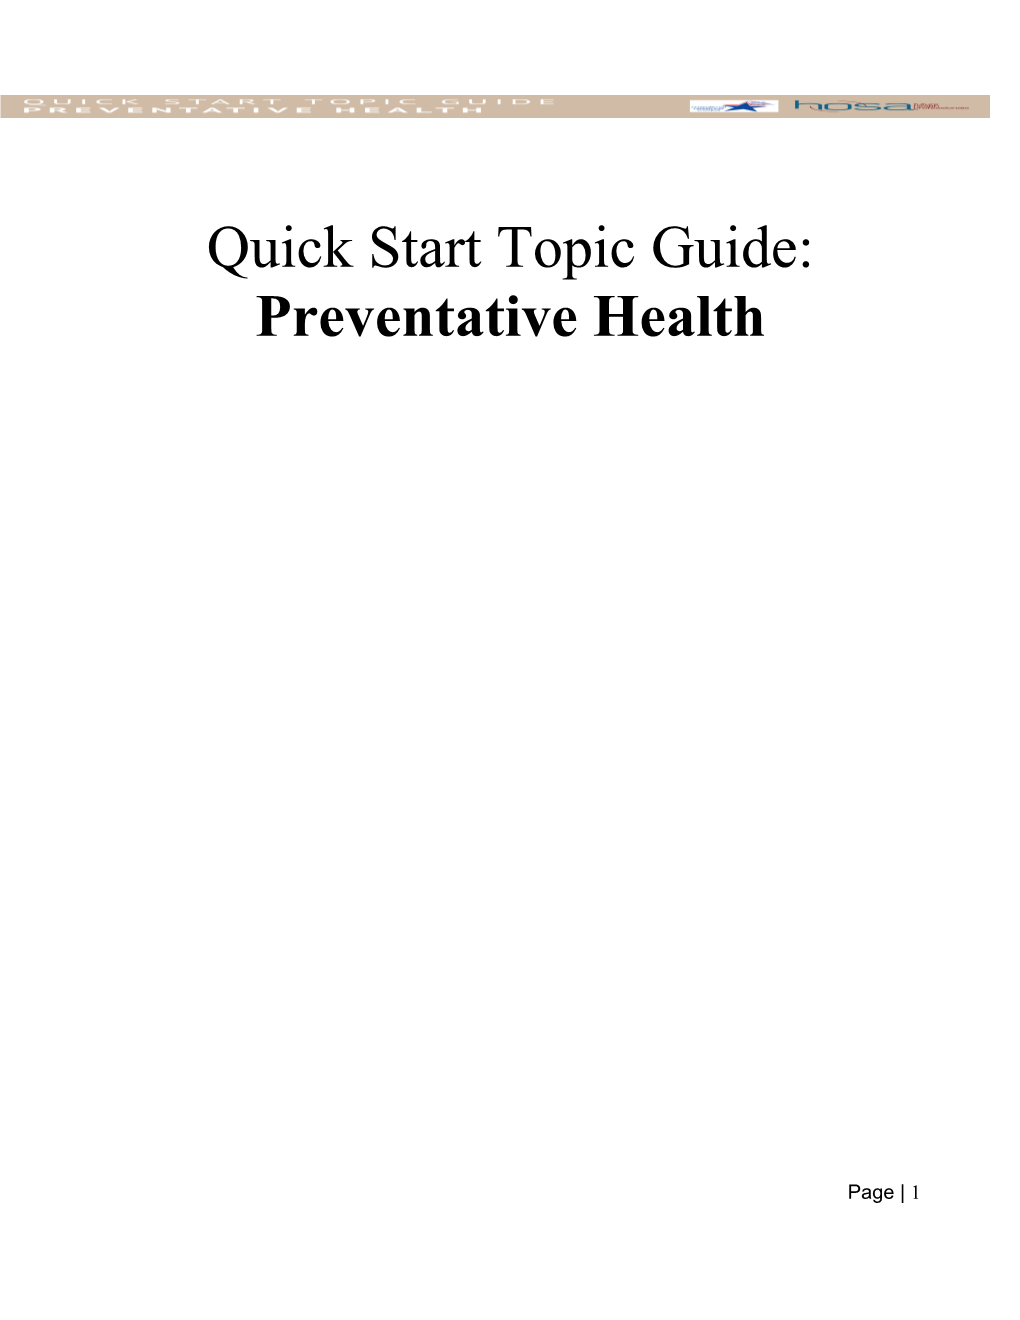 Quick Start Topic Guide